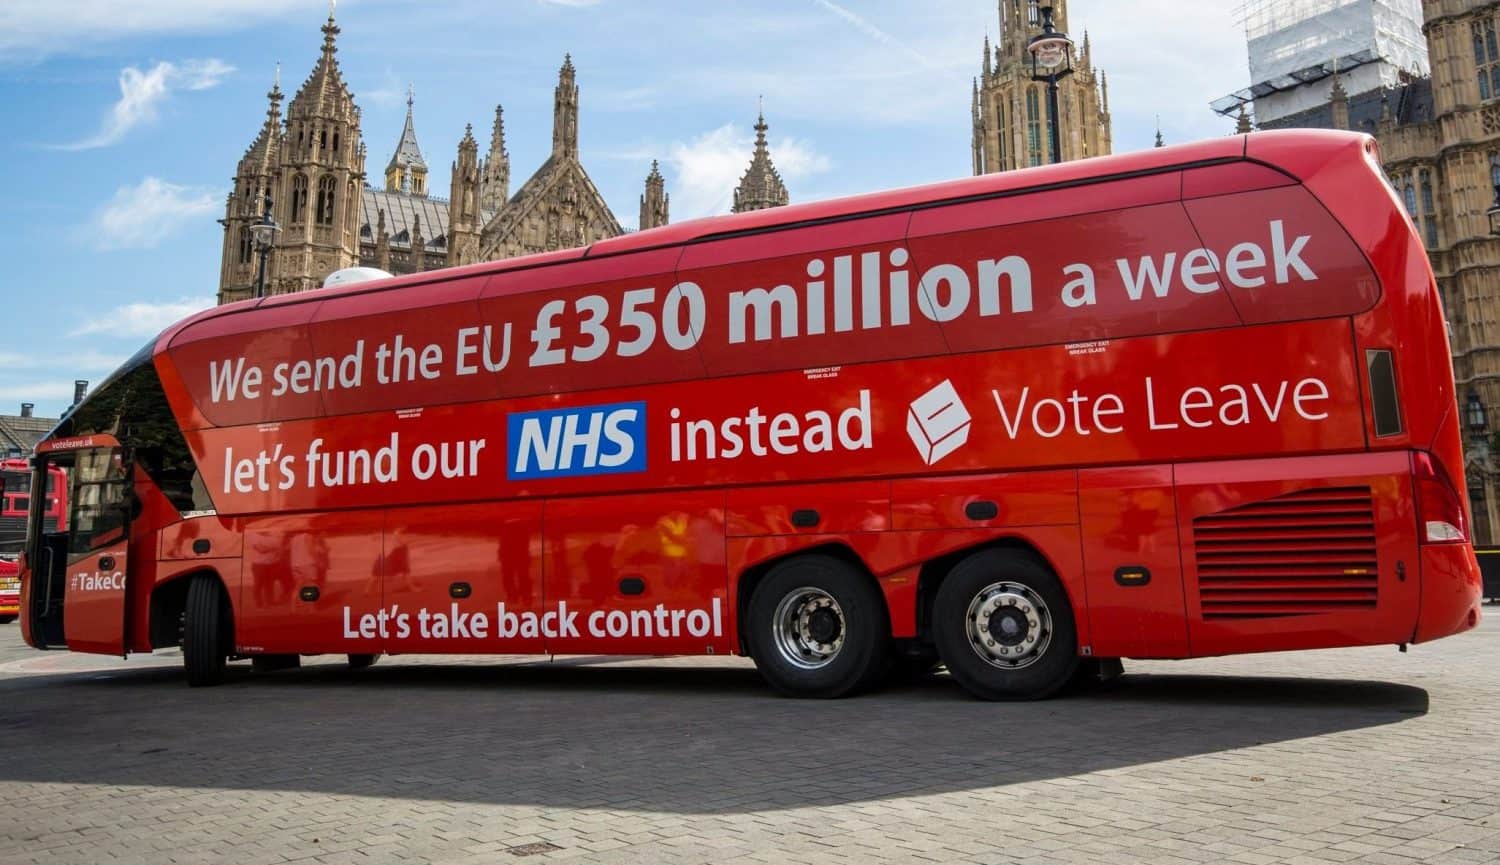 PROMISES: The Brexit campaign was a perfect example of how not to do a referendum